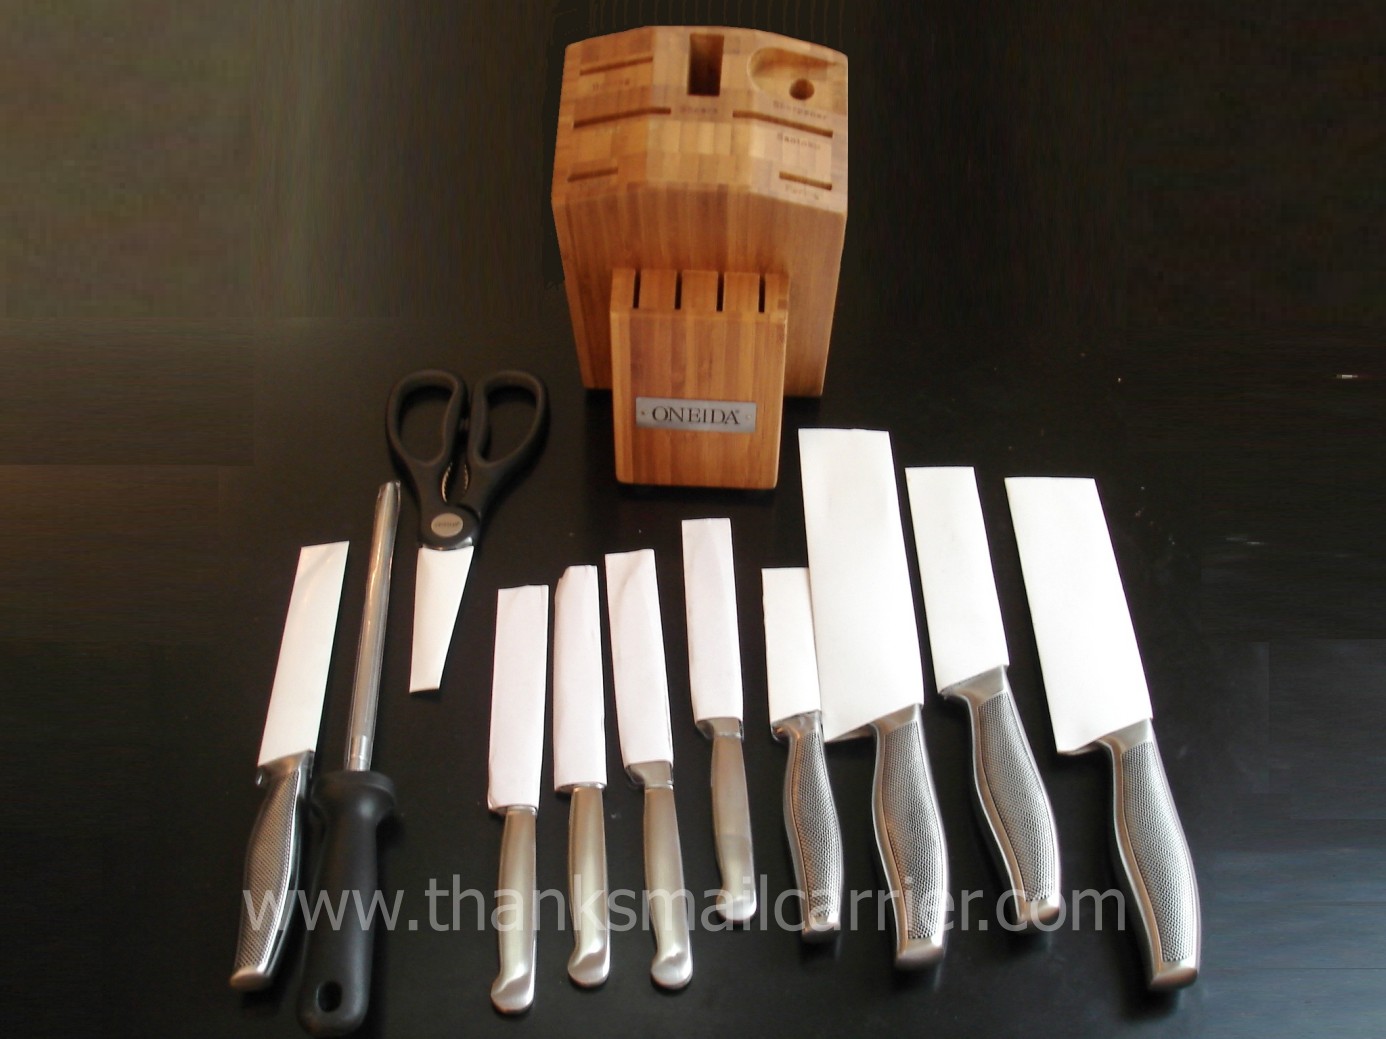 Thanks, Mail Carrier: Checking Our List: Oneida Sure Grip 12-Piece Knife Set  w/Bamboo Block {Review}